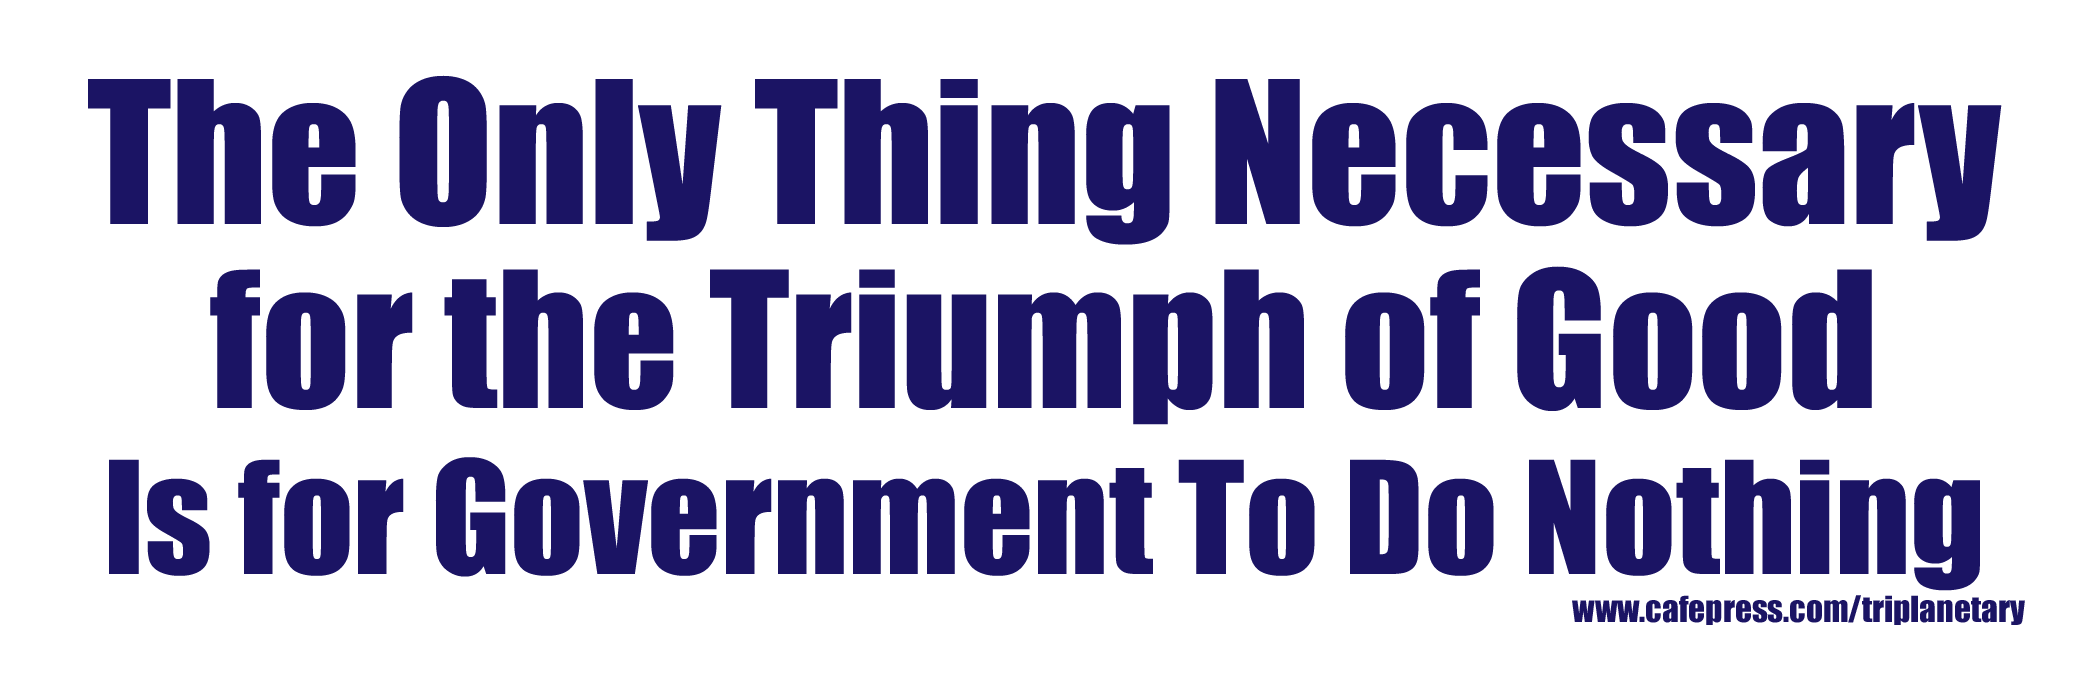 White and blue image of bumper sticker: 'The Only Thing Necessary for the Triumph of Good is for Government to Do Nothing'